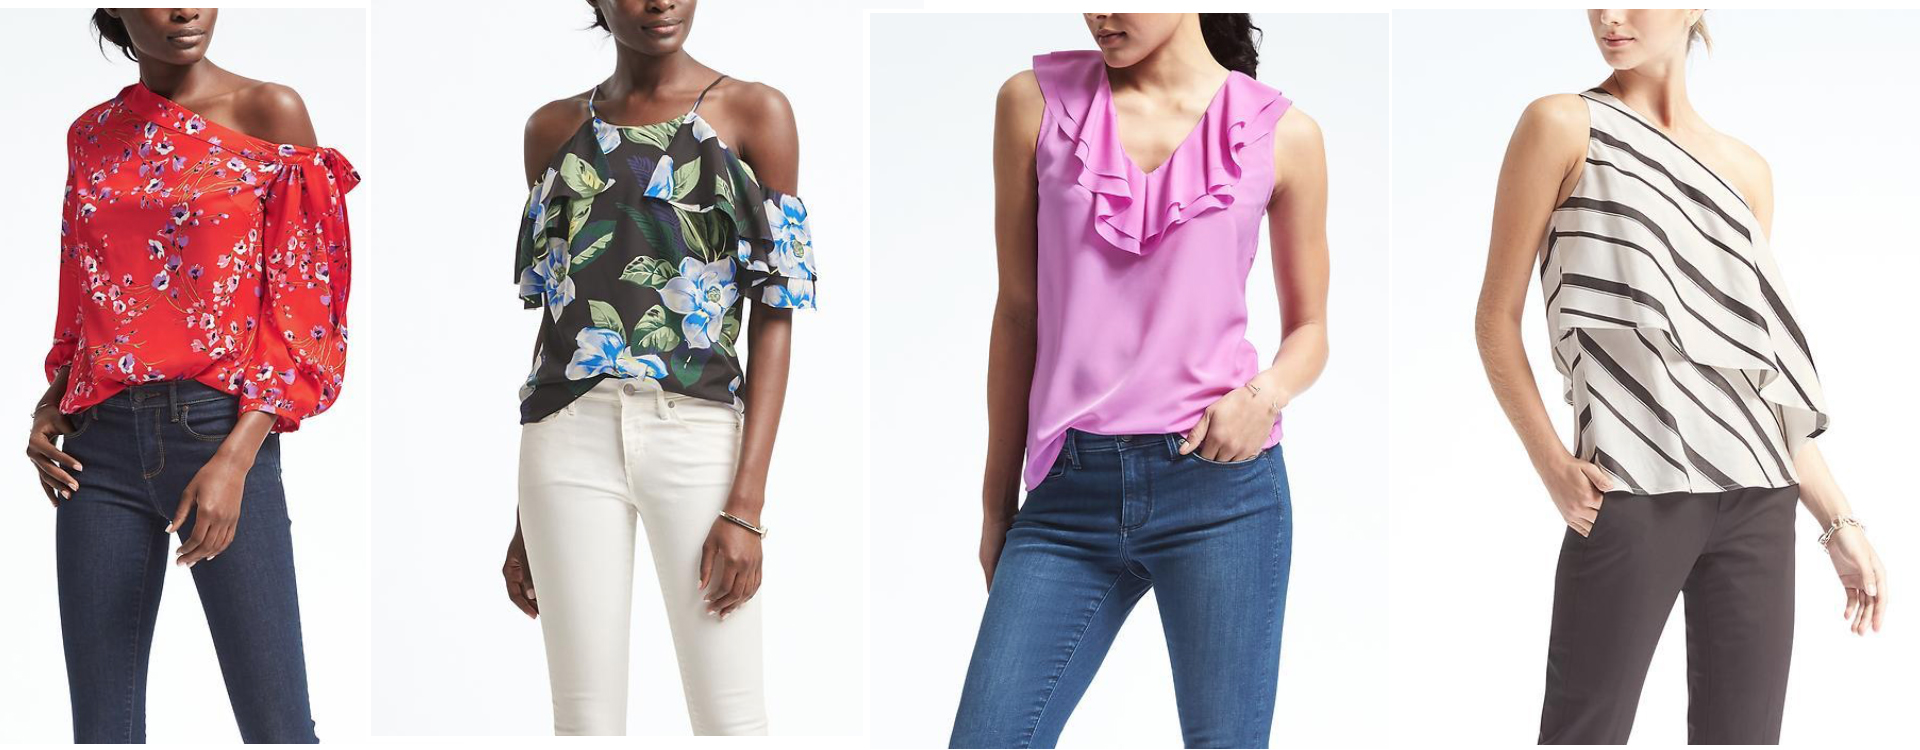 What kind of ruffle tops are good for you (body types, petite, plus size)